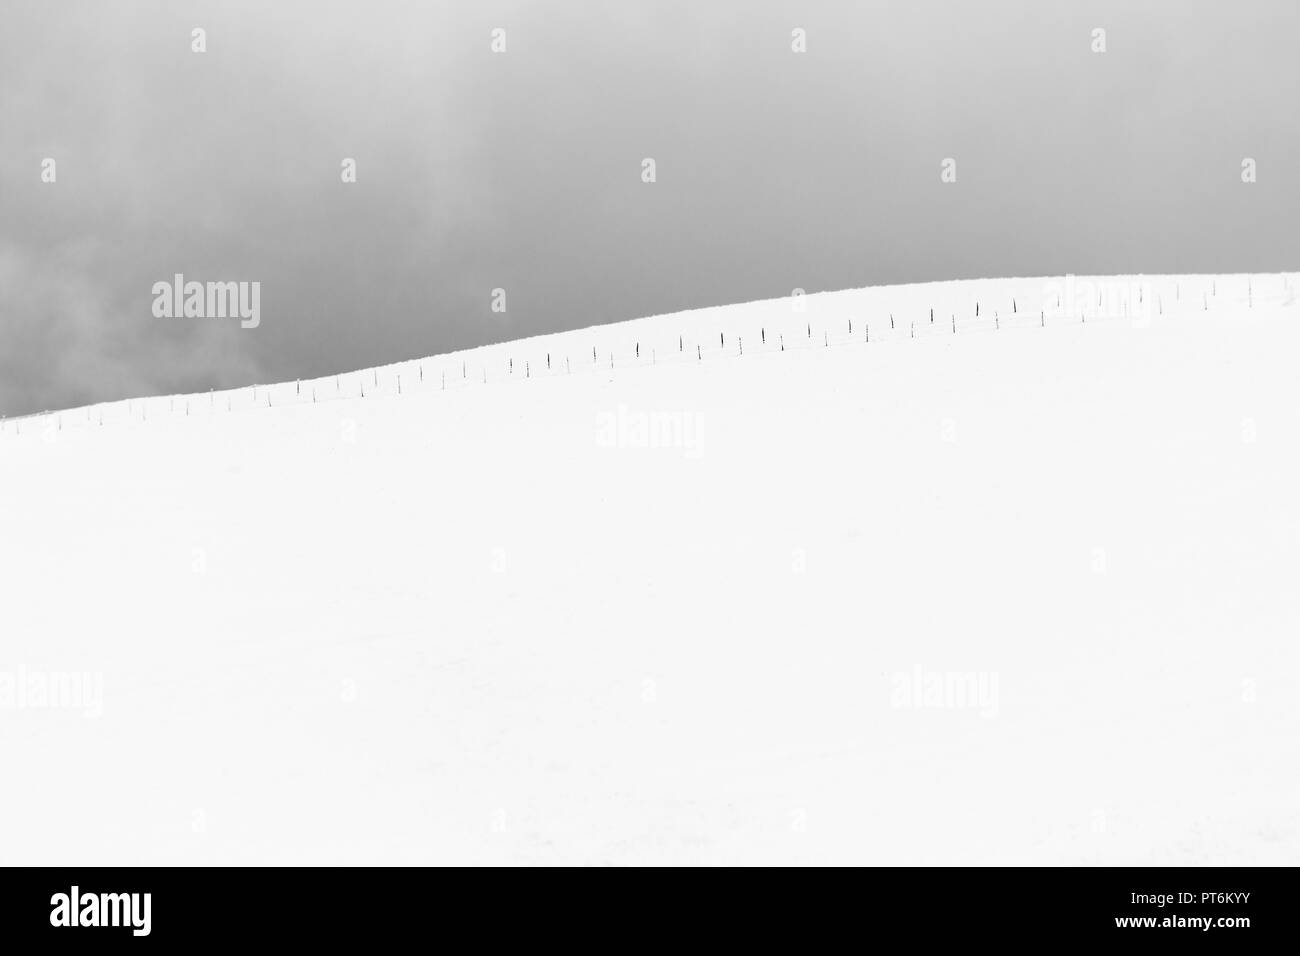 A very minimalistic view of a mountain covered by snow, with a fence Stock Photo